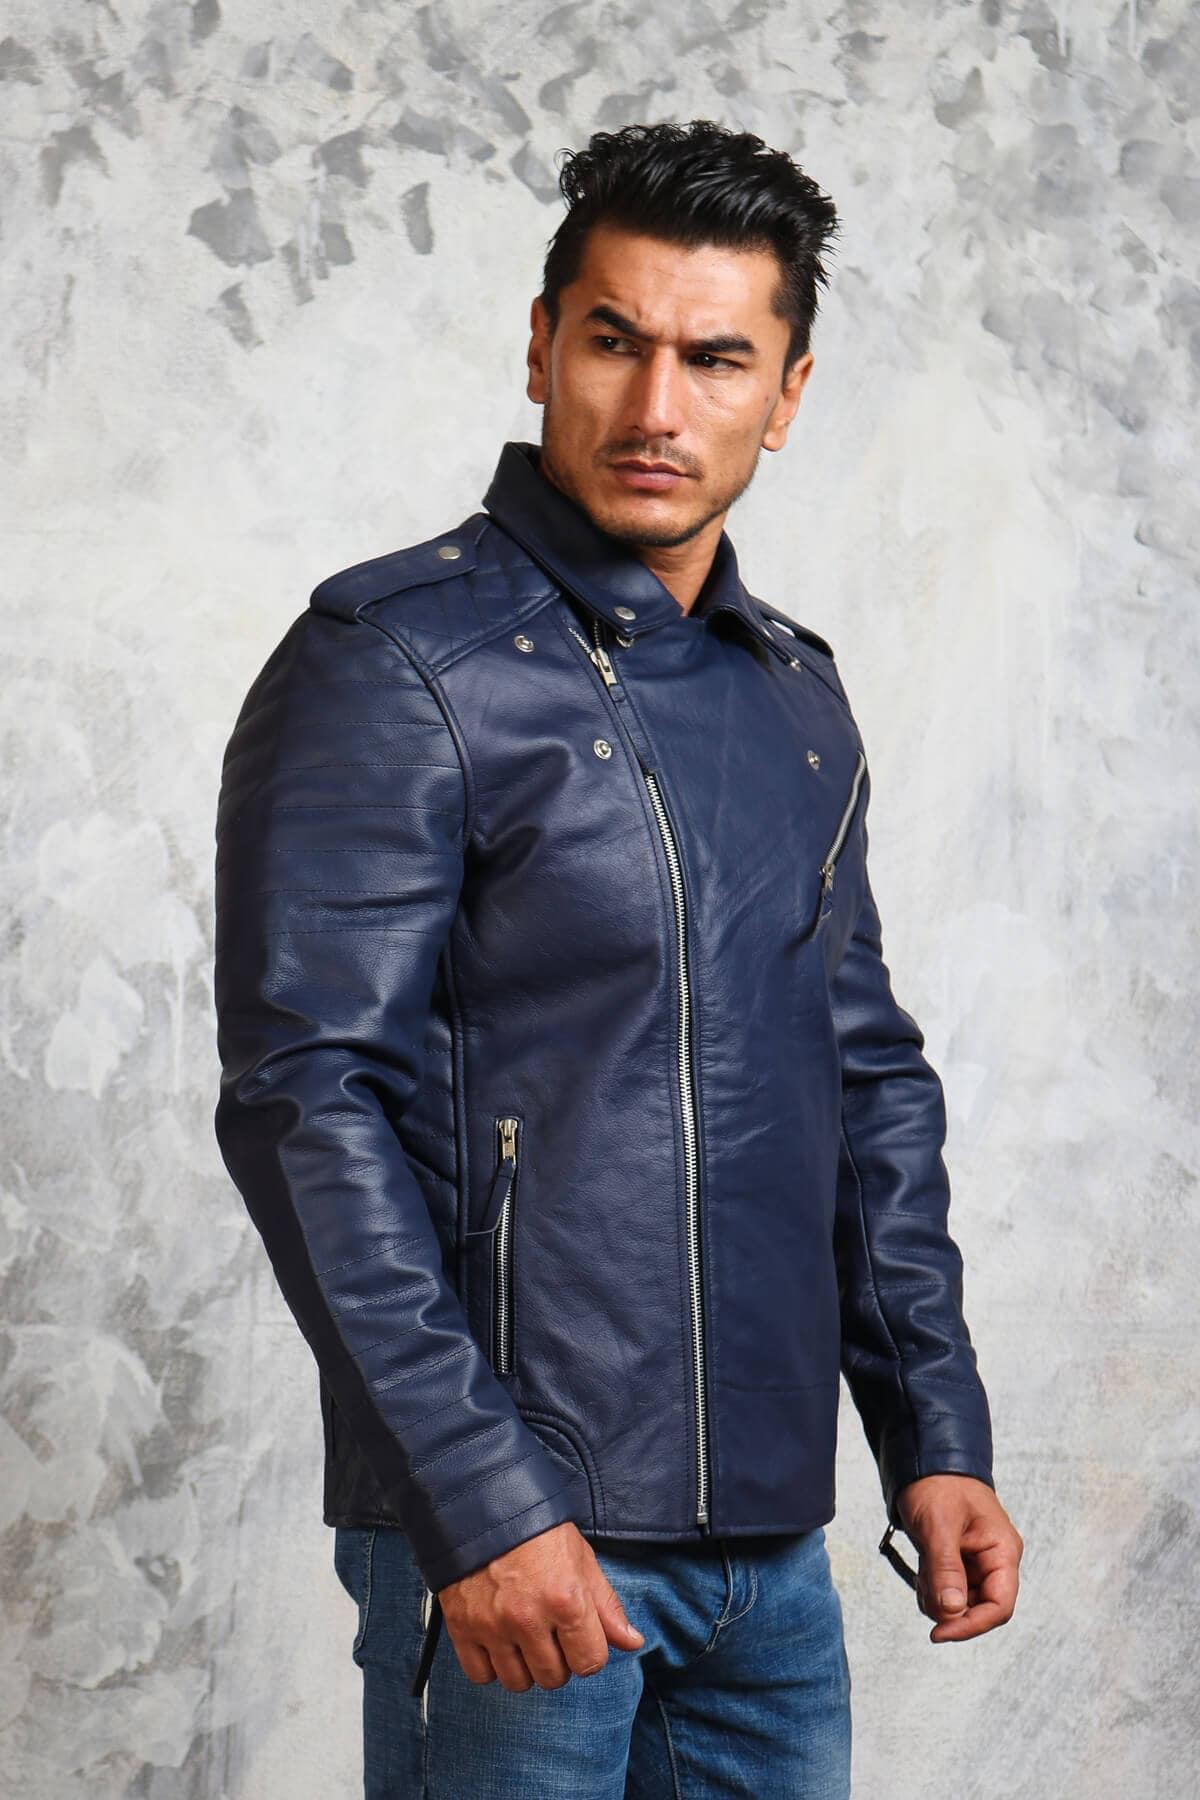 Leather Outfit for Men